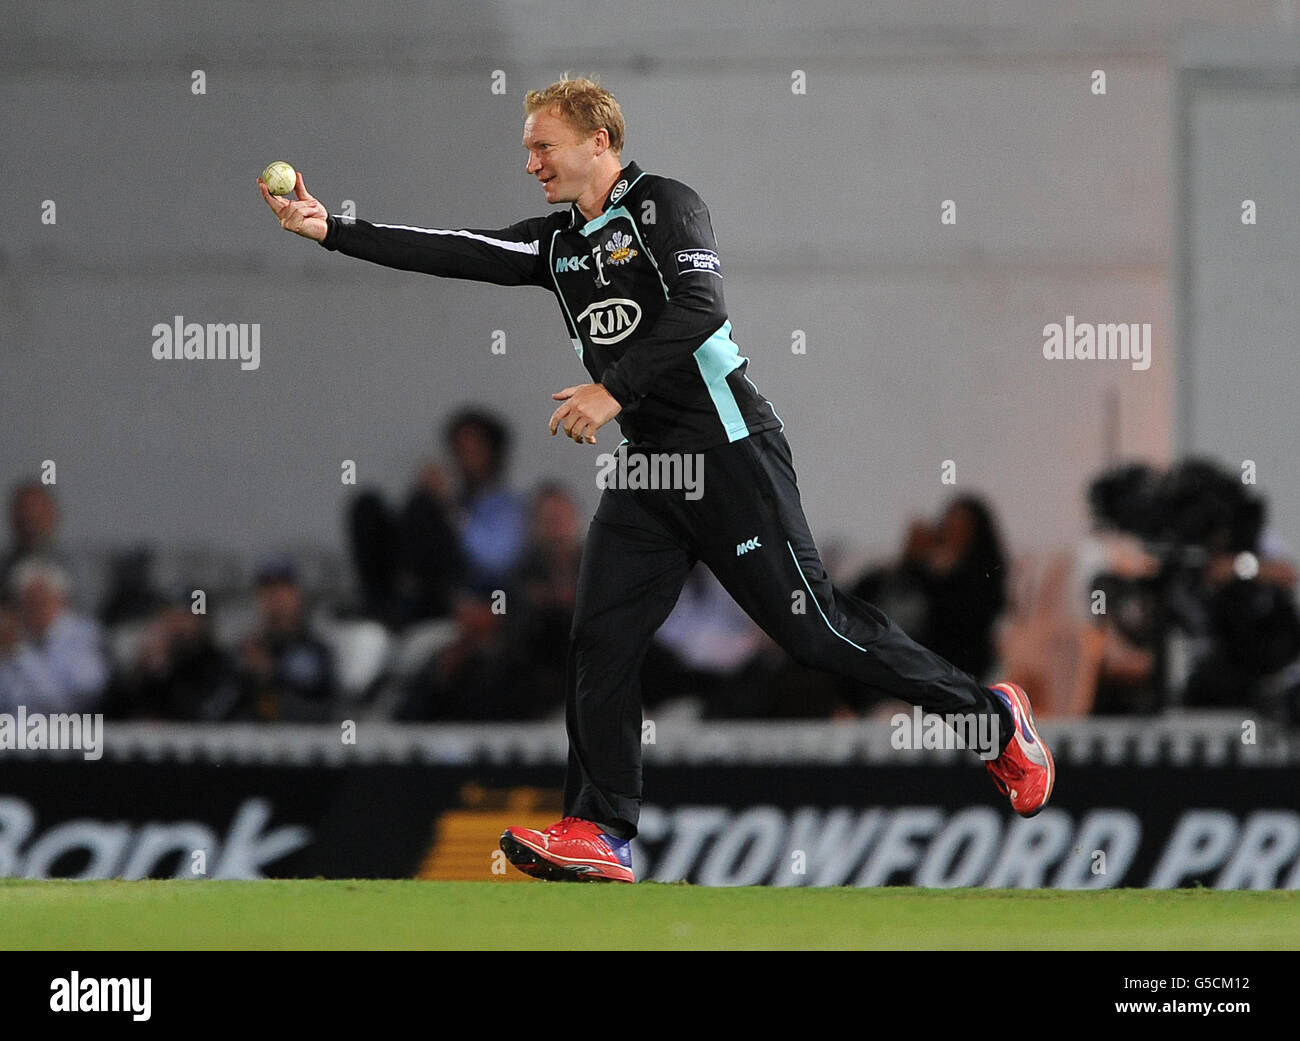 Cricket - Clydesdale Bank 40 - Group B - Surrey v Glamorgan - The Kia Oval. Surrey's Gareth Batty celebrates after taking the catch of Glamorgan's Dean Cosker. Stock Photo